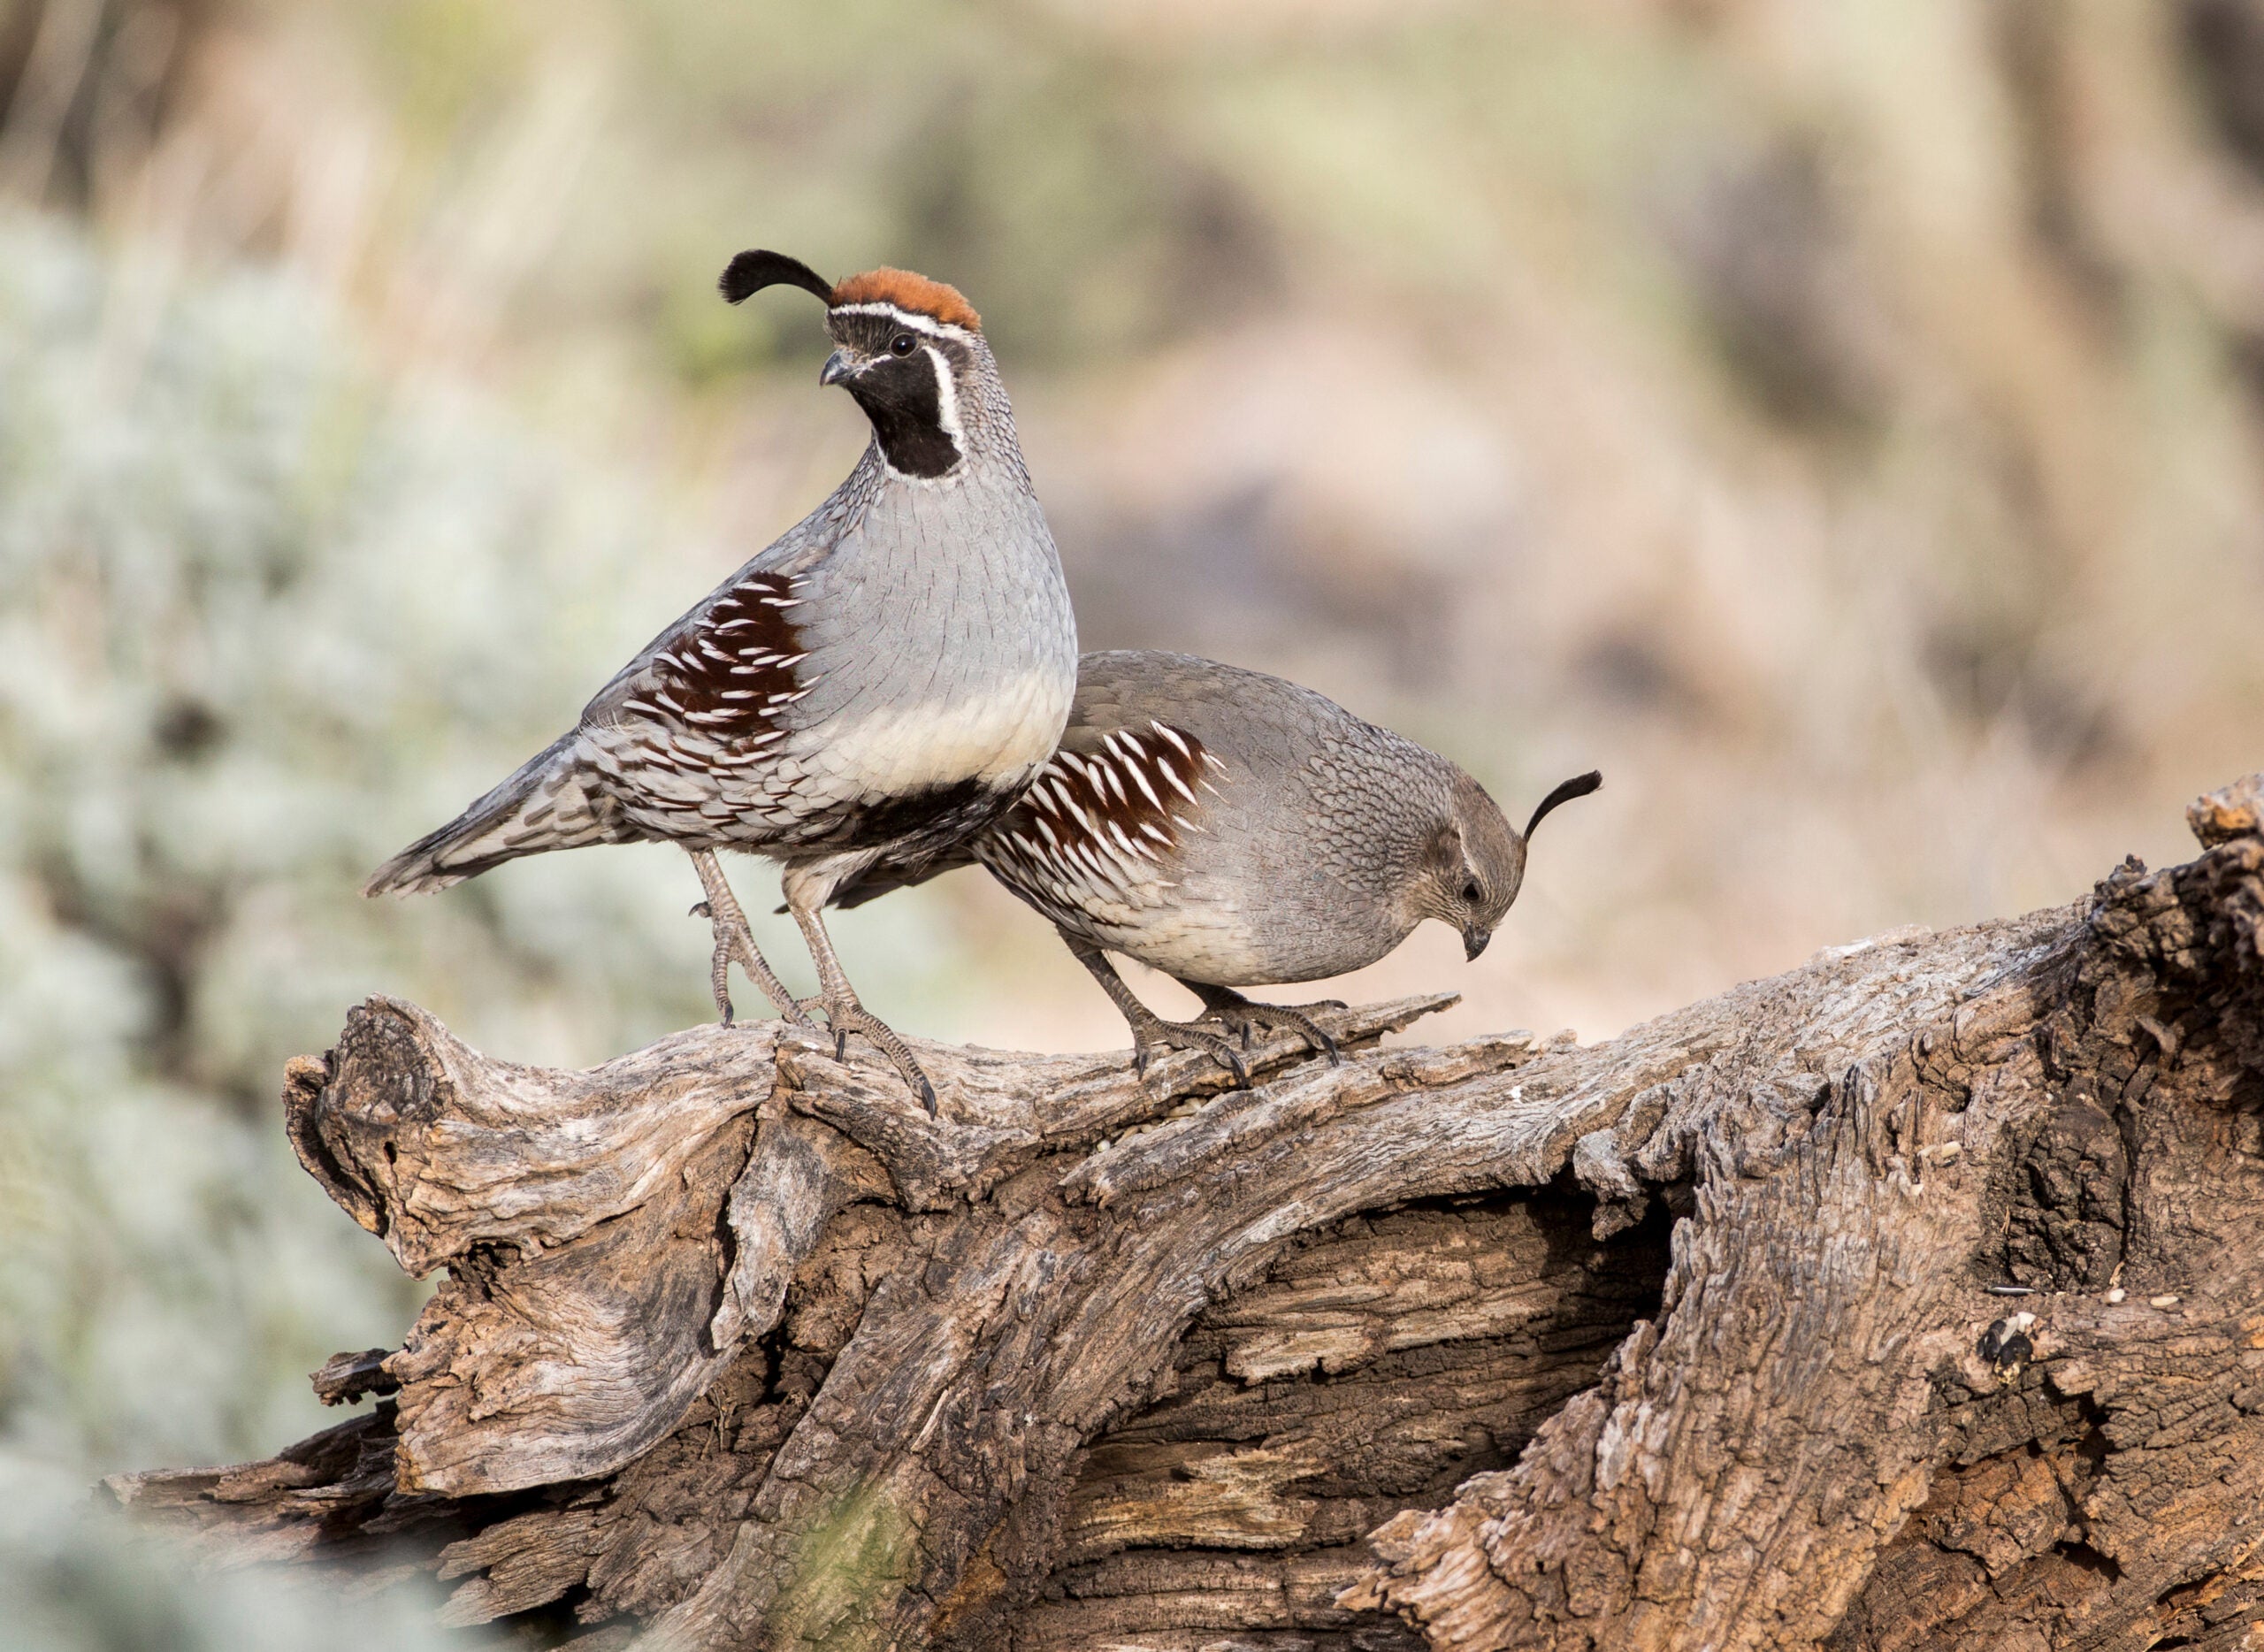 A male and female Gambel's quail stand side-by-side on a log.